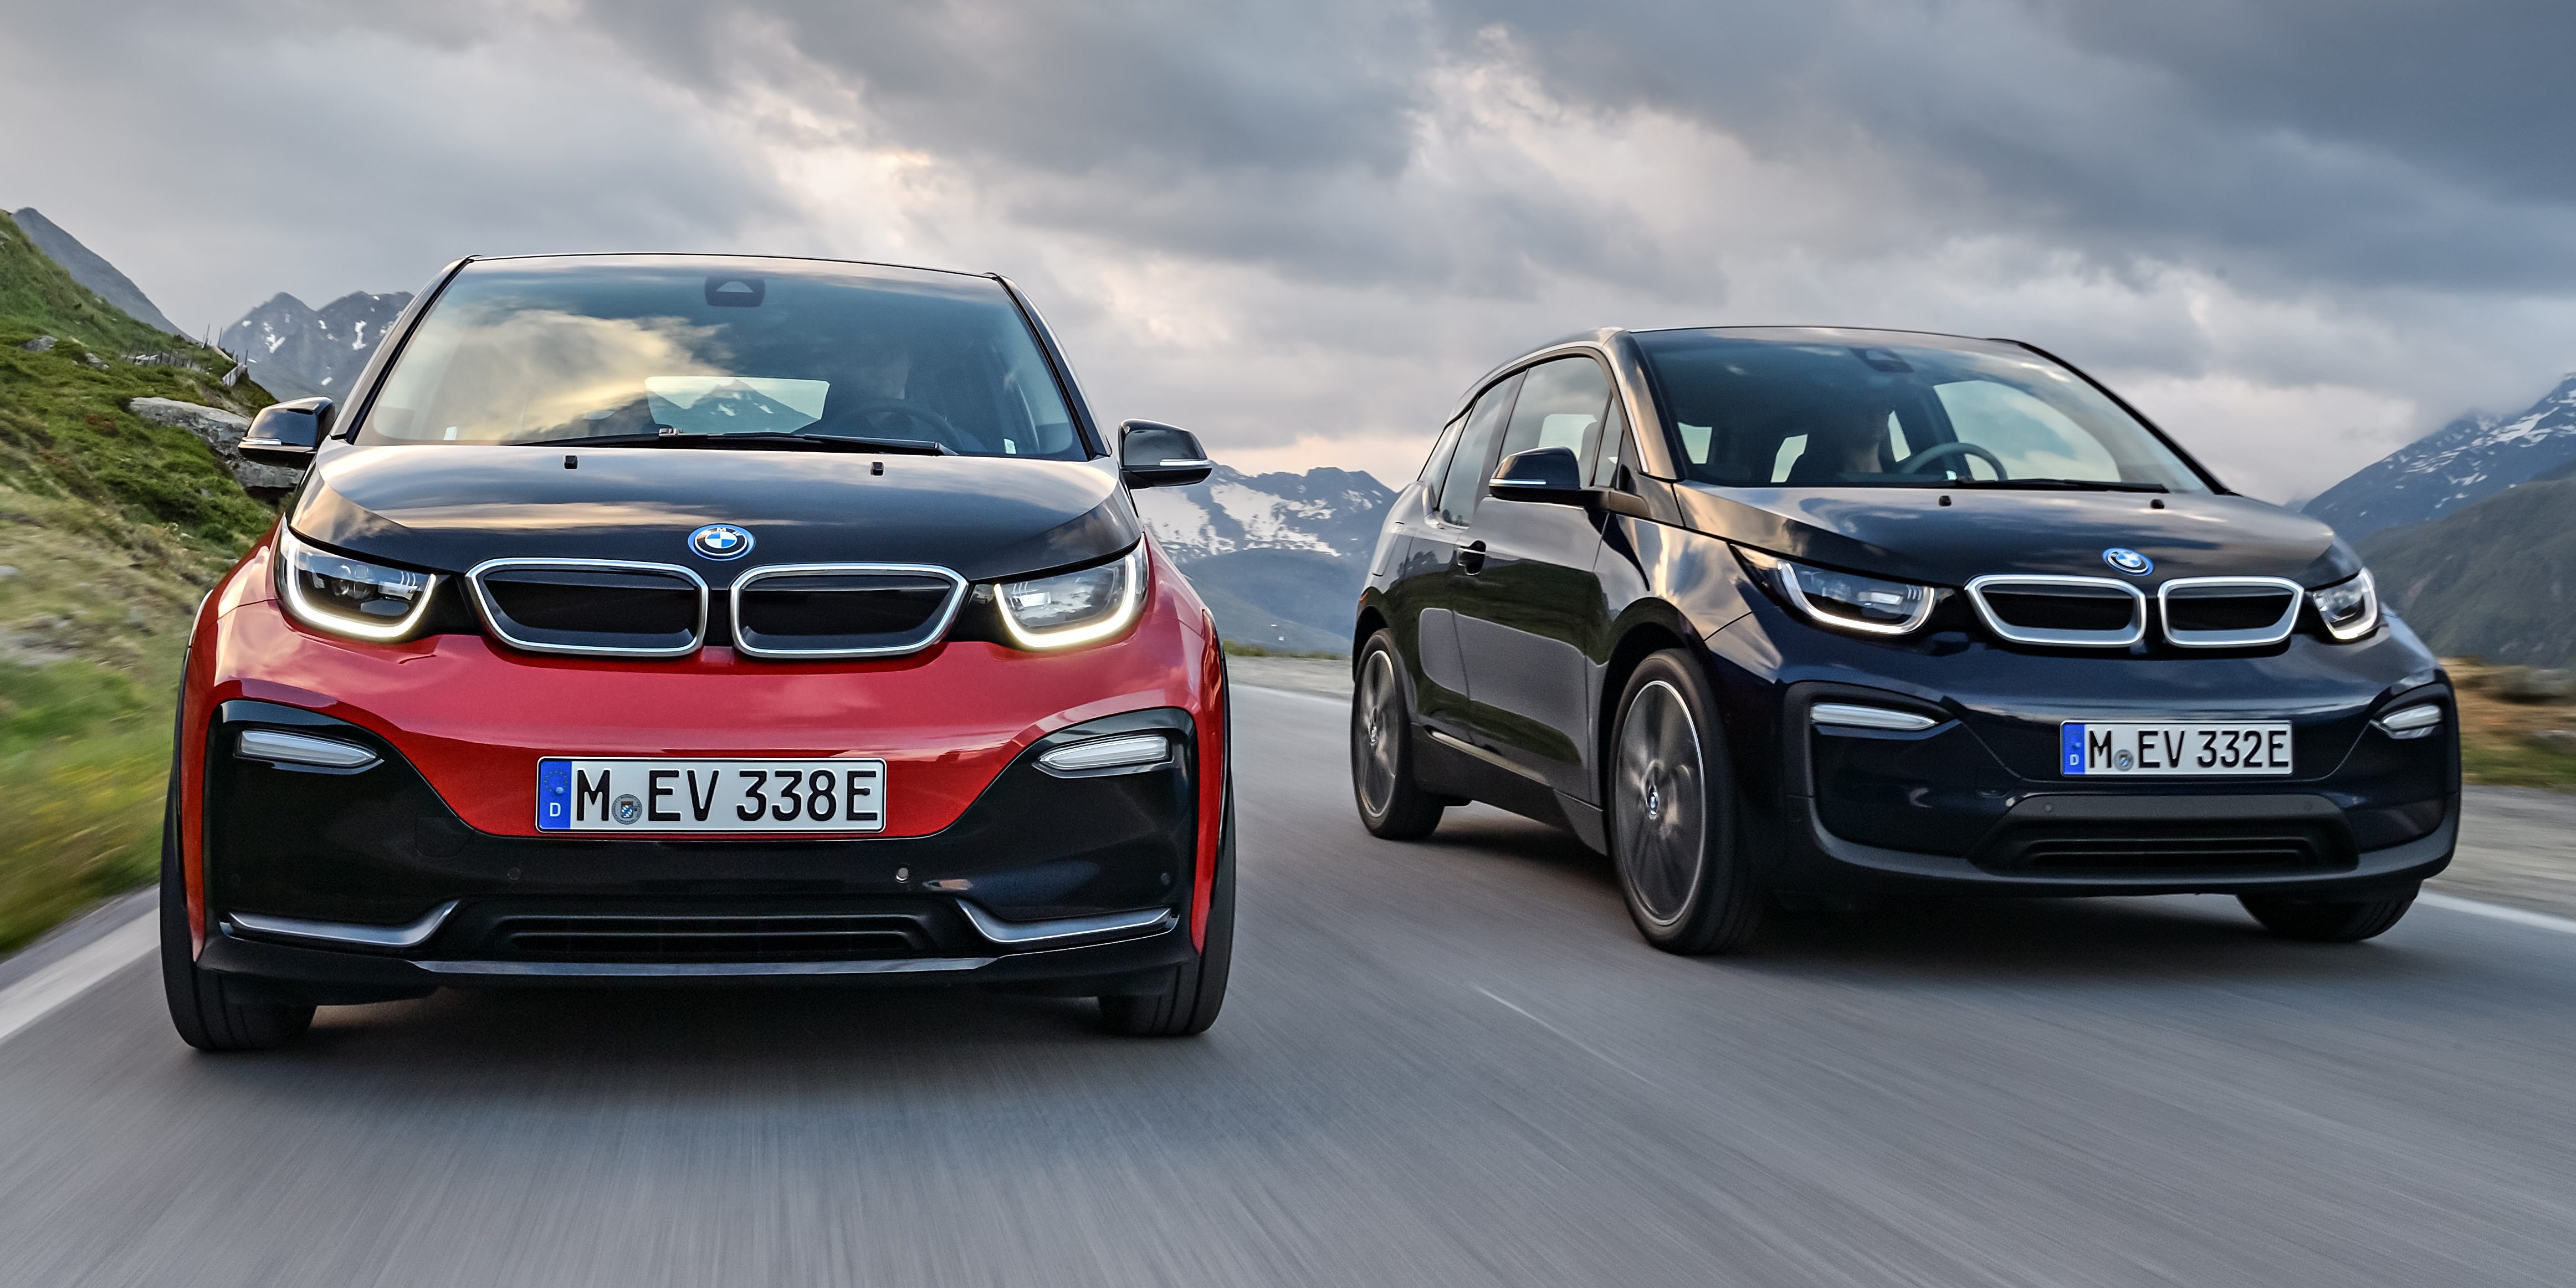 BMW will stop selling the i3 electric car in the US next month